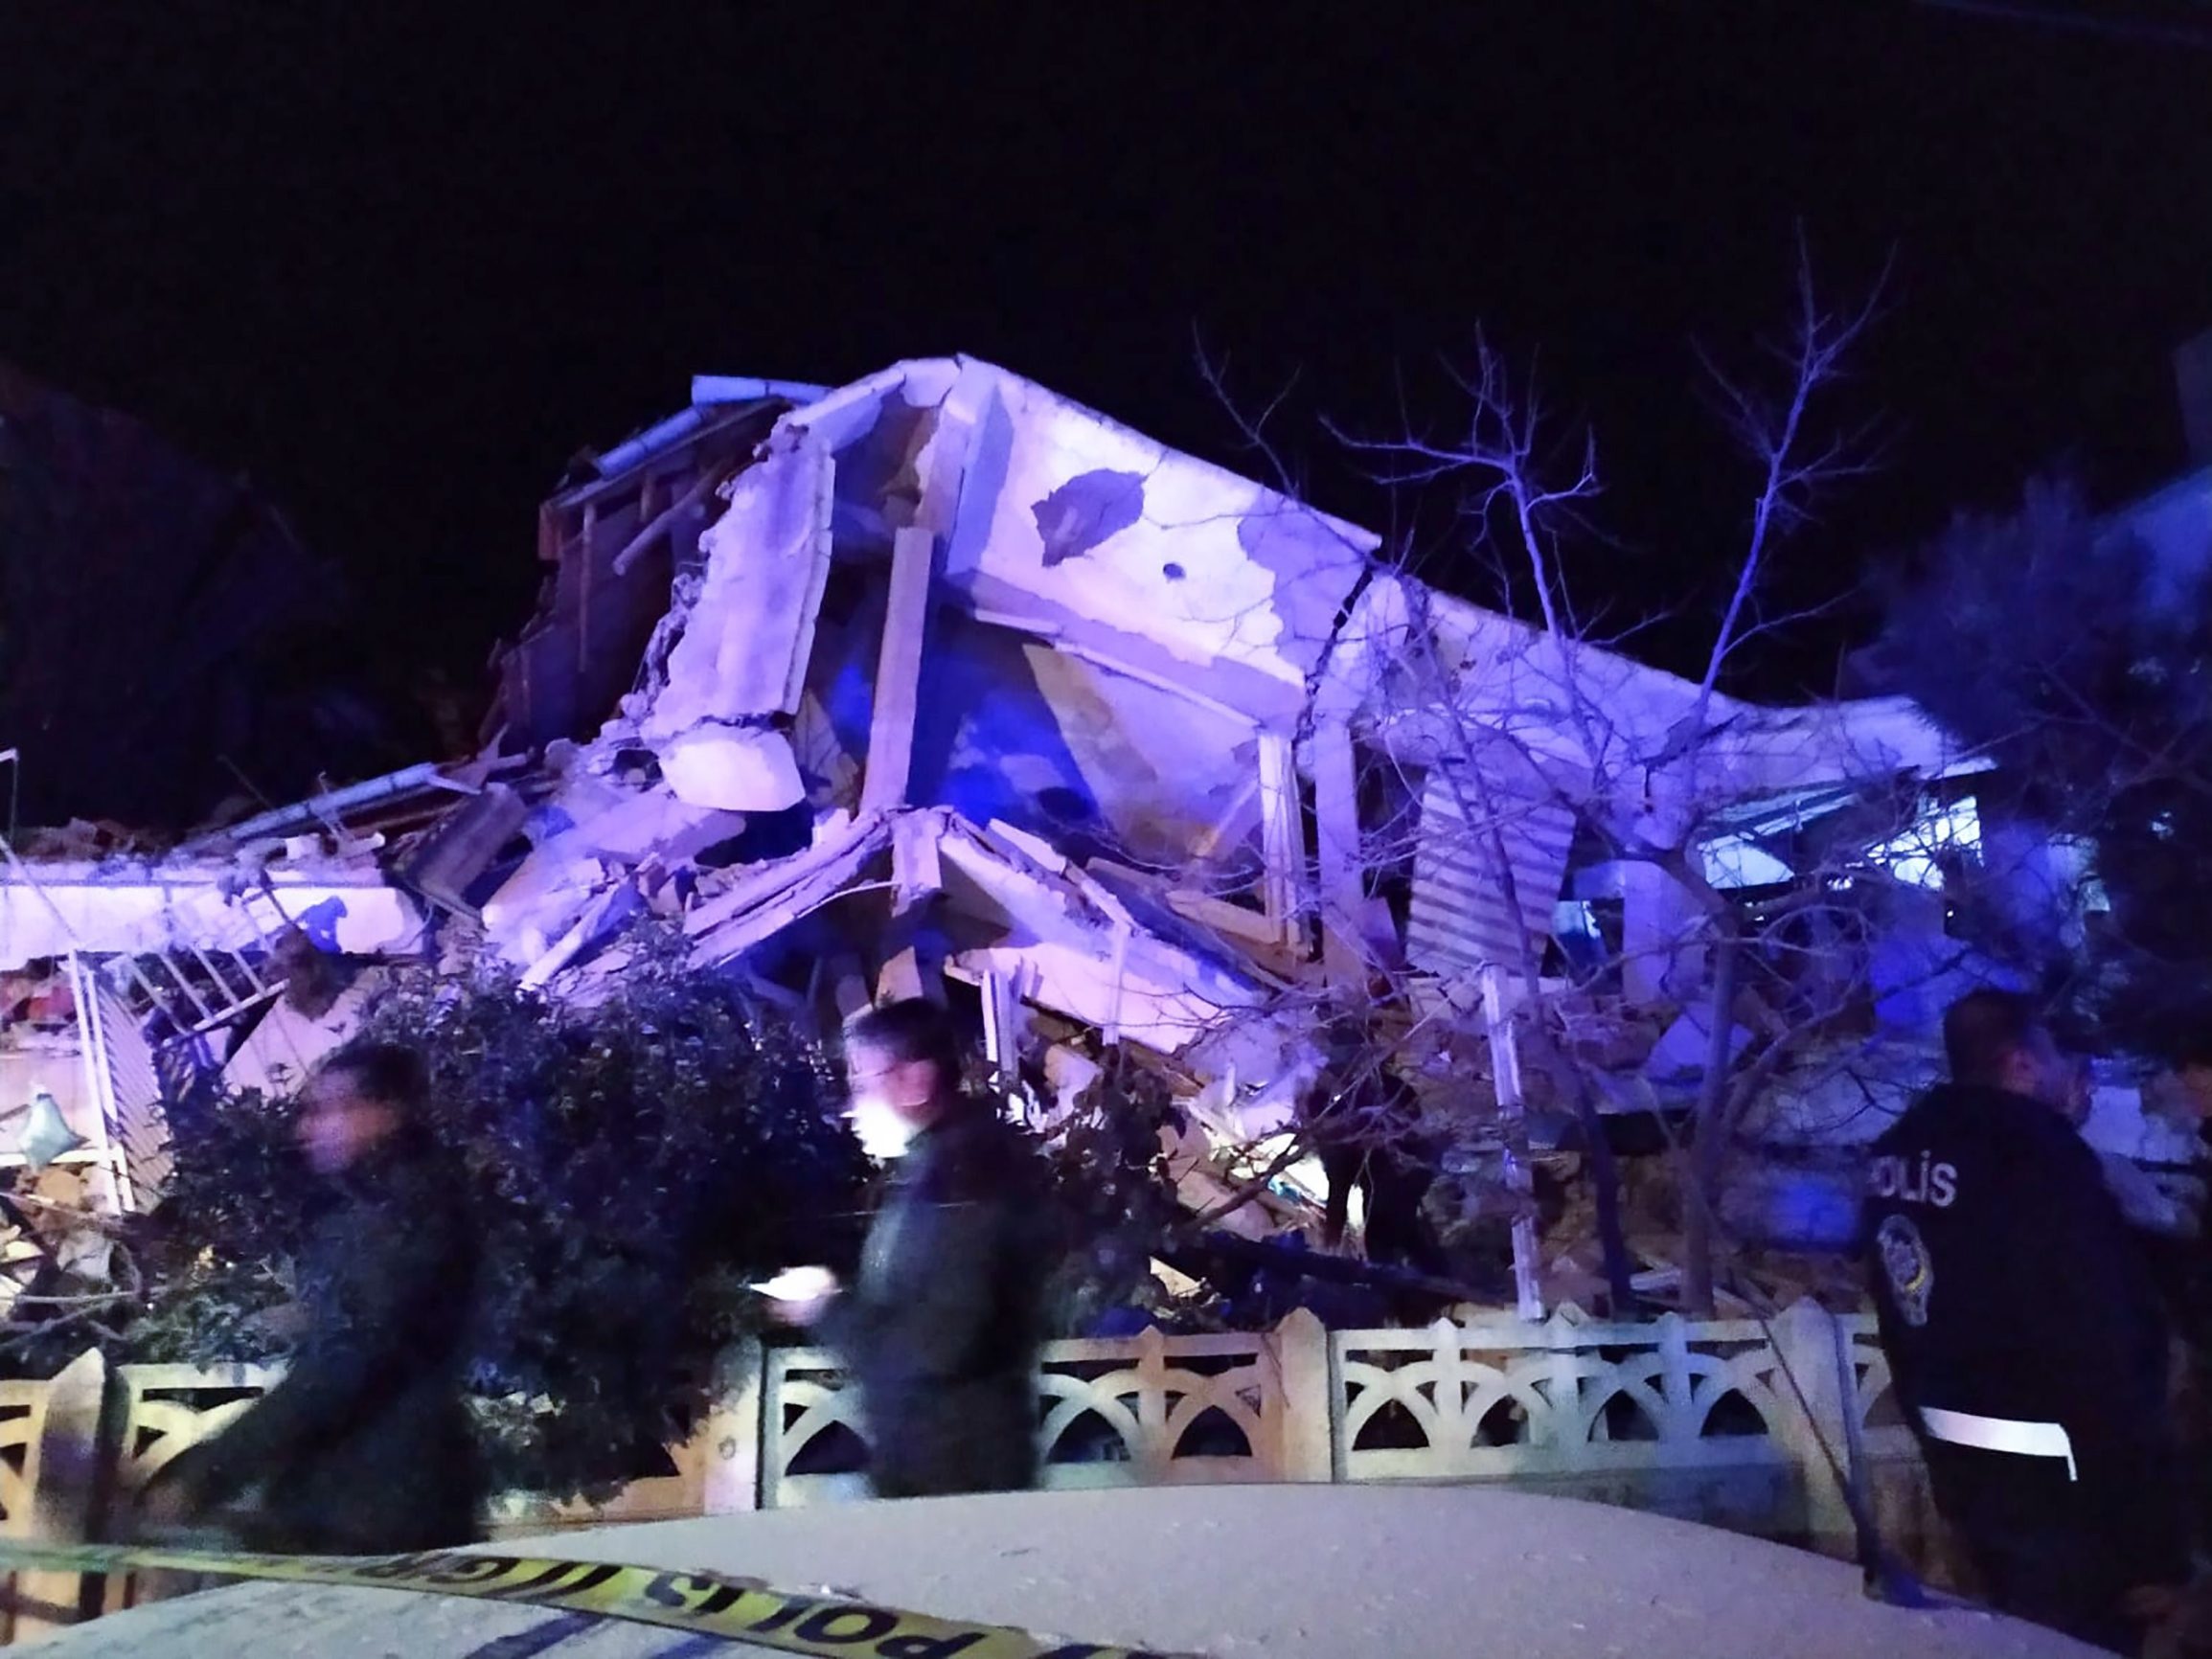 Turkish officials and police arrive at the scene of a collapsed building following a 6.8 magnitude earthquake in Elazig, eastern Turkey on January 24, 2020, killing several people according to the Turkish interior ministry. (Photo by DHA / Demiroren News Agency (DHA) / AFP) / Turkey OUT